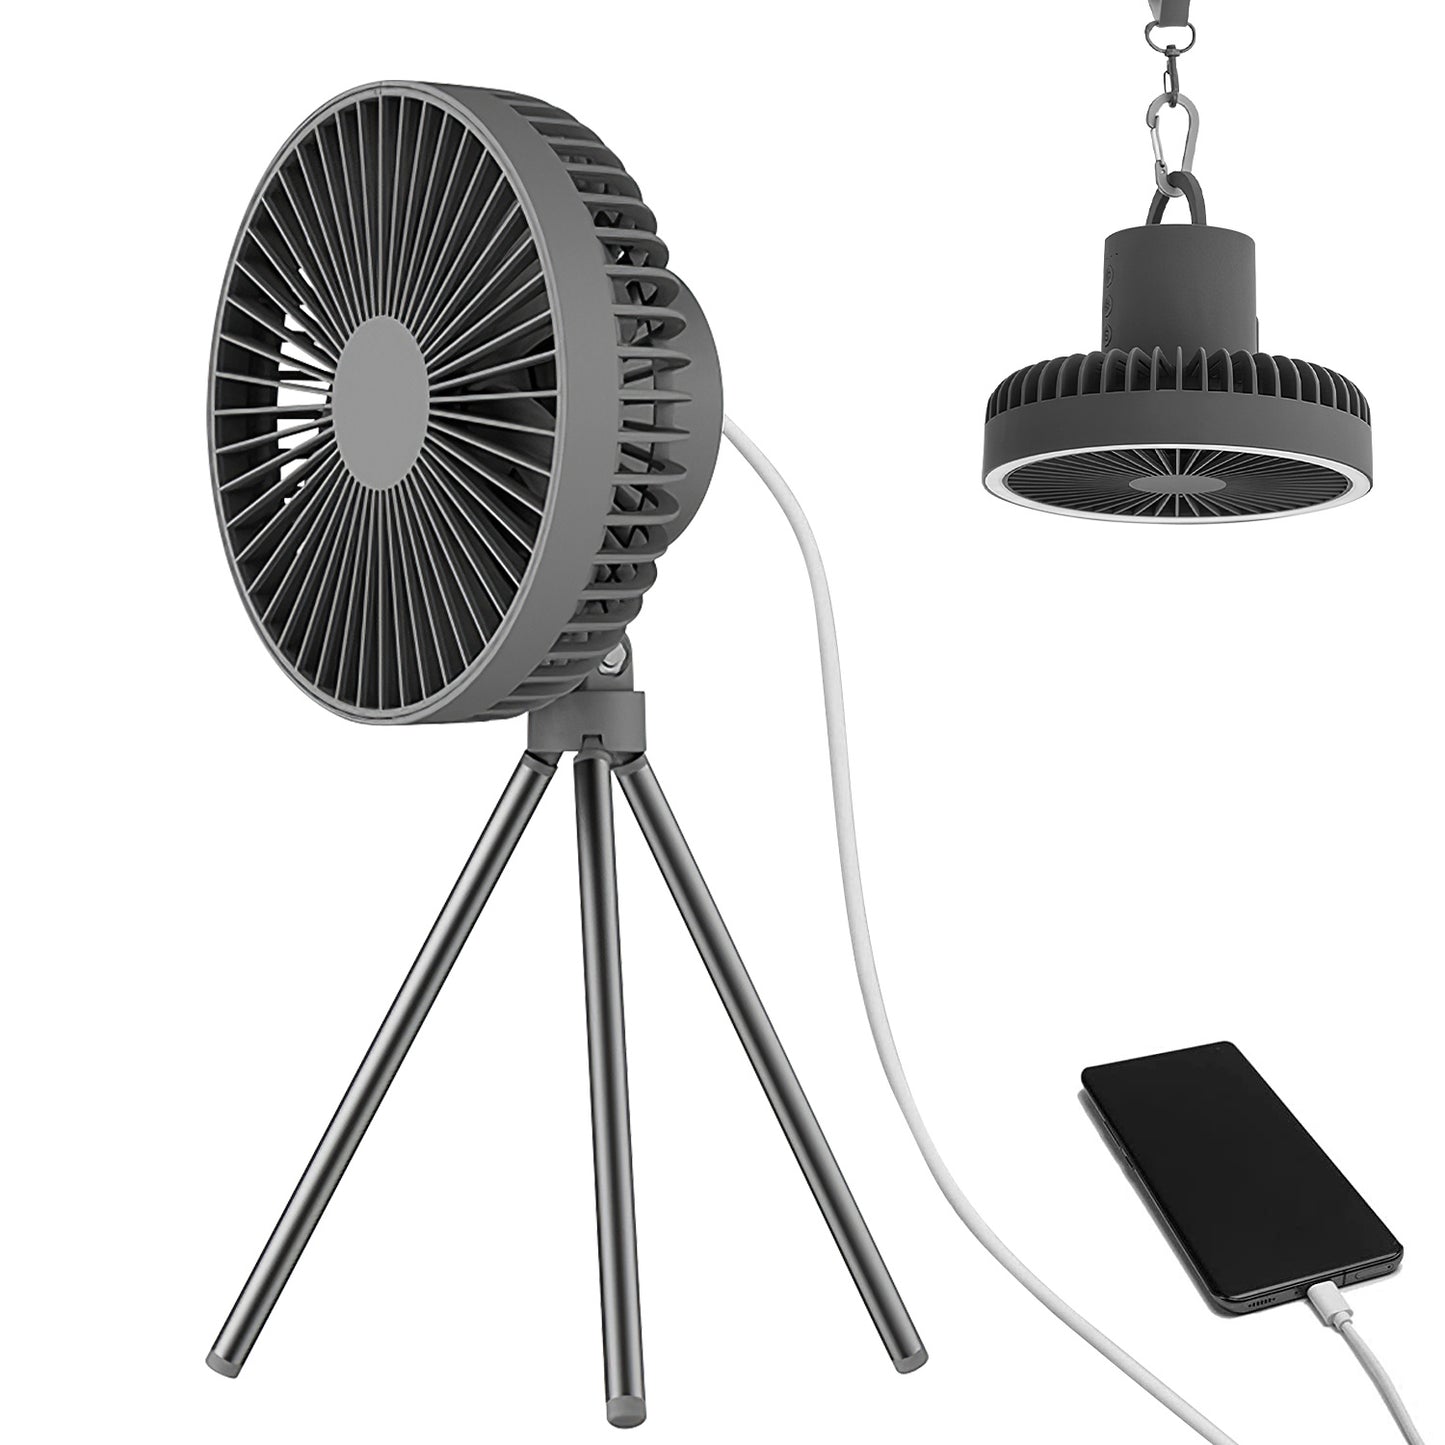 Portable Camping Fan Rechargeable Battery Powered Foldable Tripod Fan for Tent with Hanging Hook Carabiner Personal Desk Fan with 3 Speed Setting for Travel Hiking Fishing